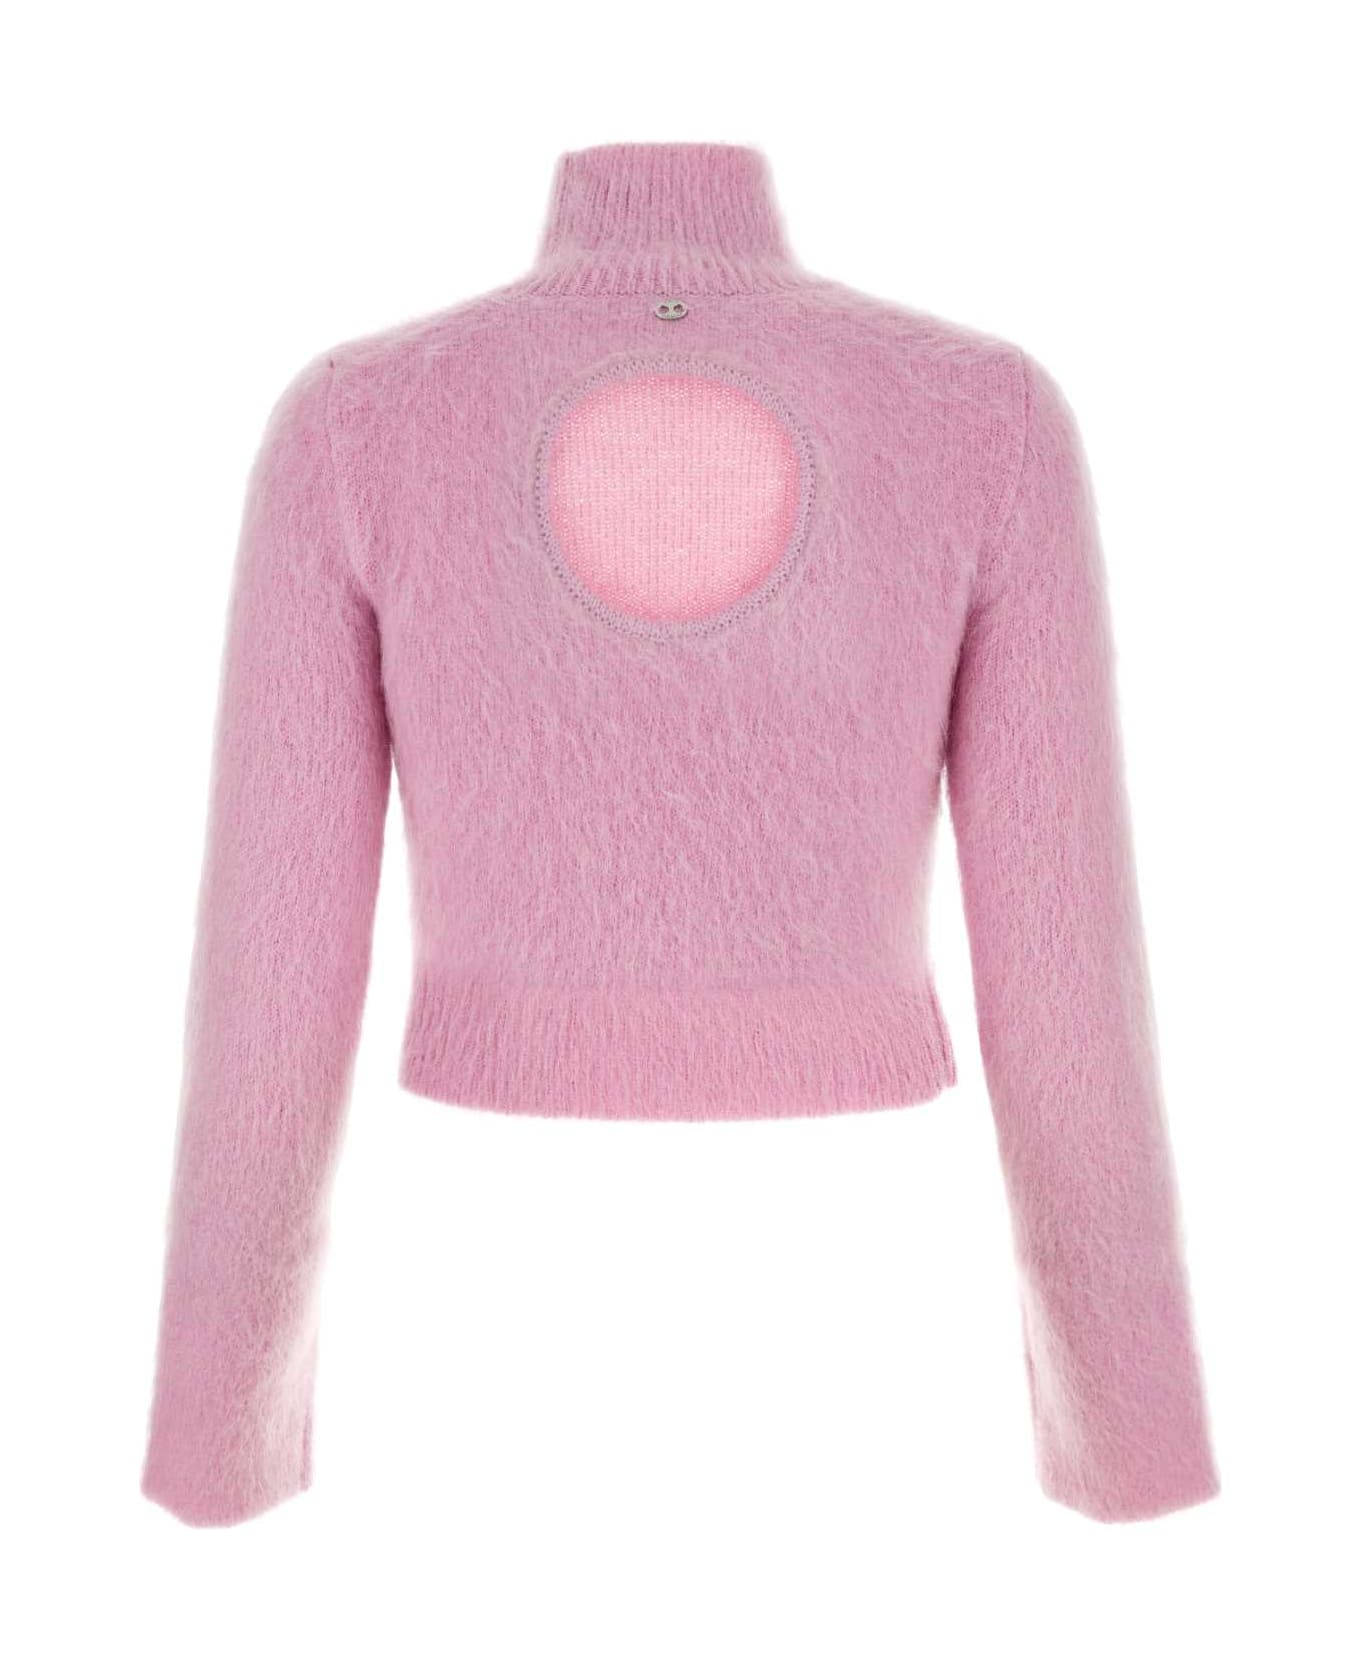 Paco Rabanne Pink Wool Blend Sweater - PINK ニットウェア